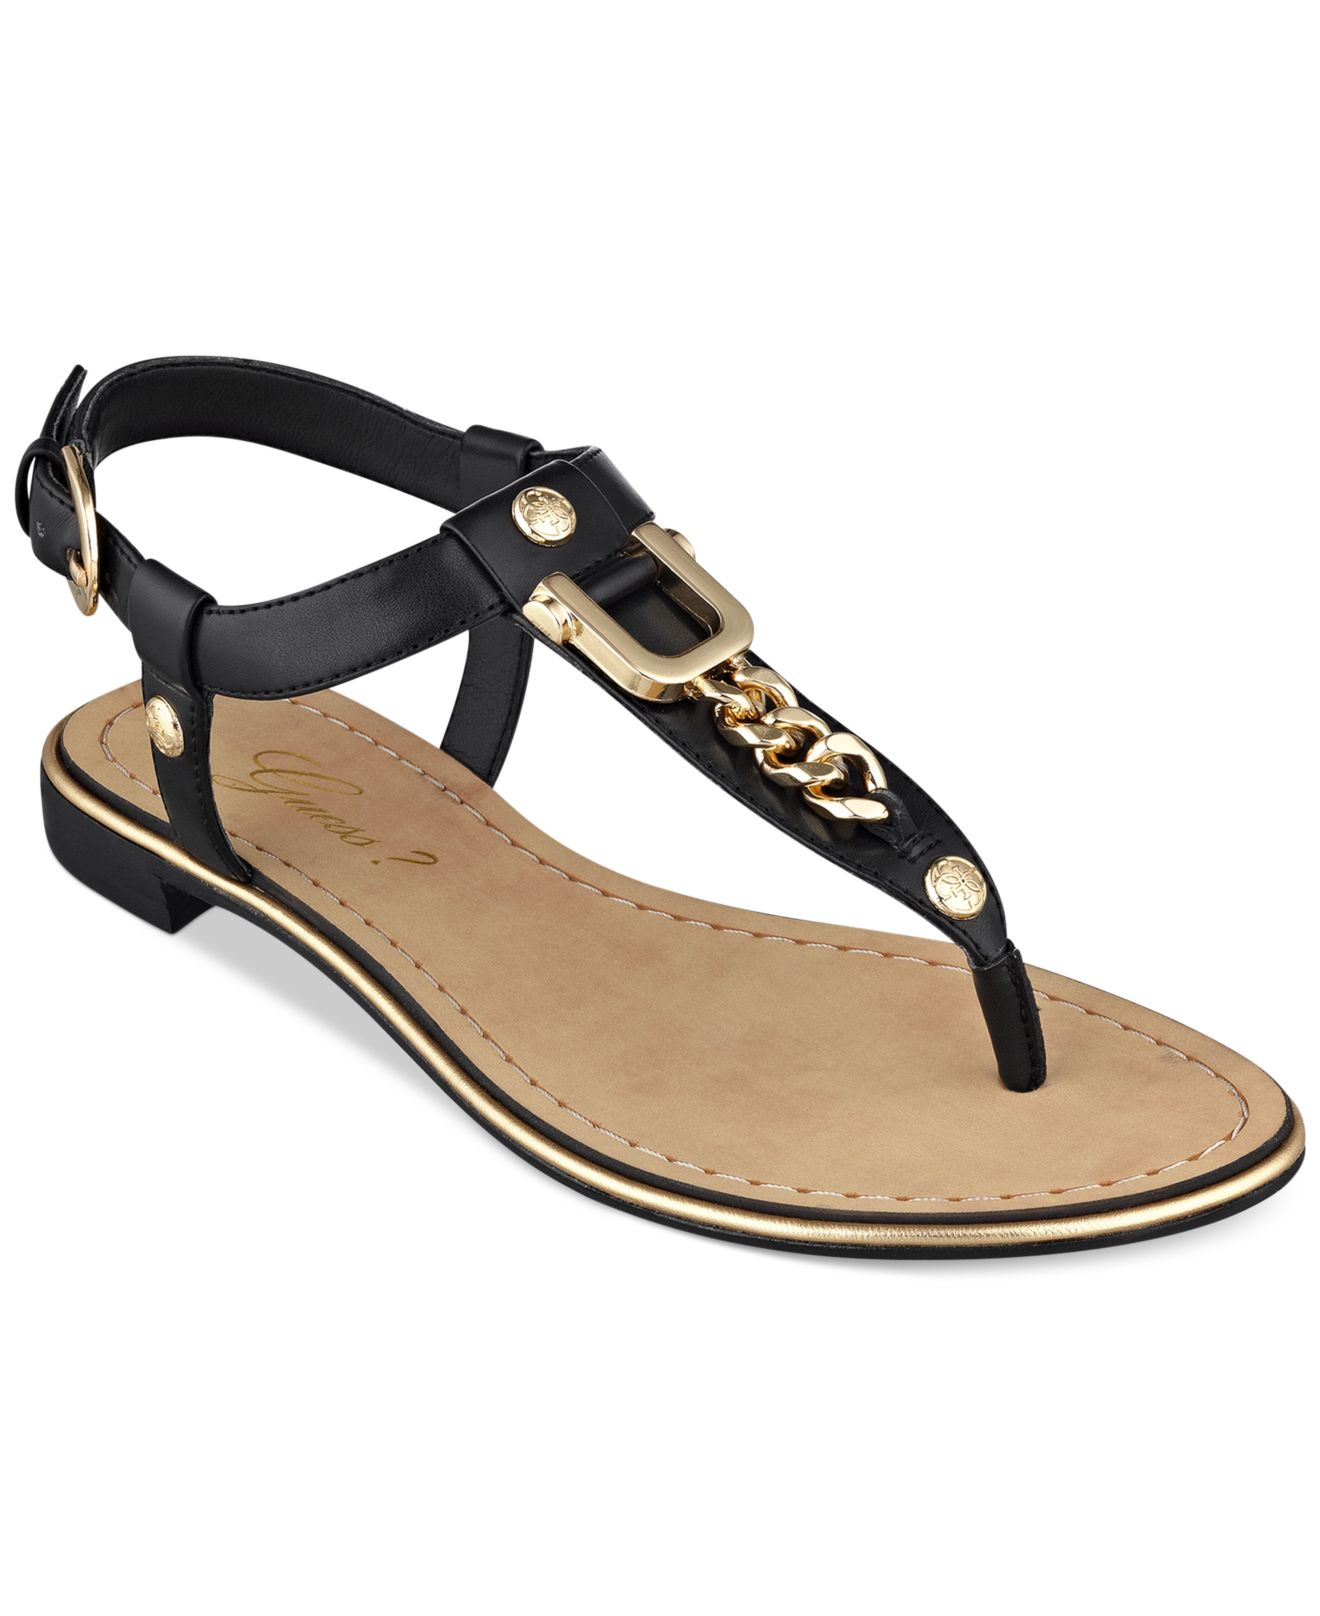 Guess Rehan Chain Thong Sandals in Black - Lyst